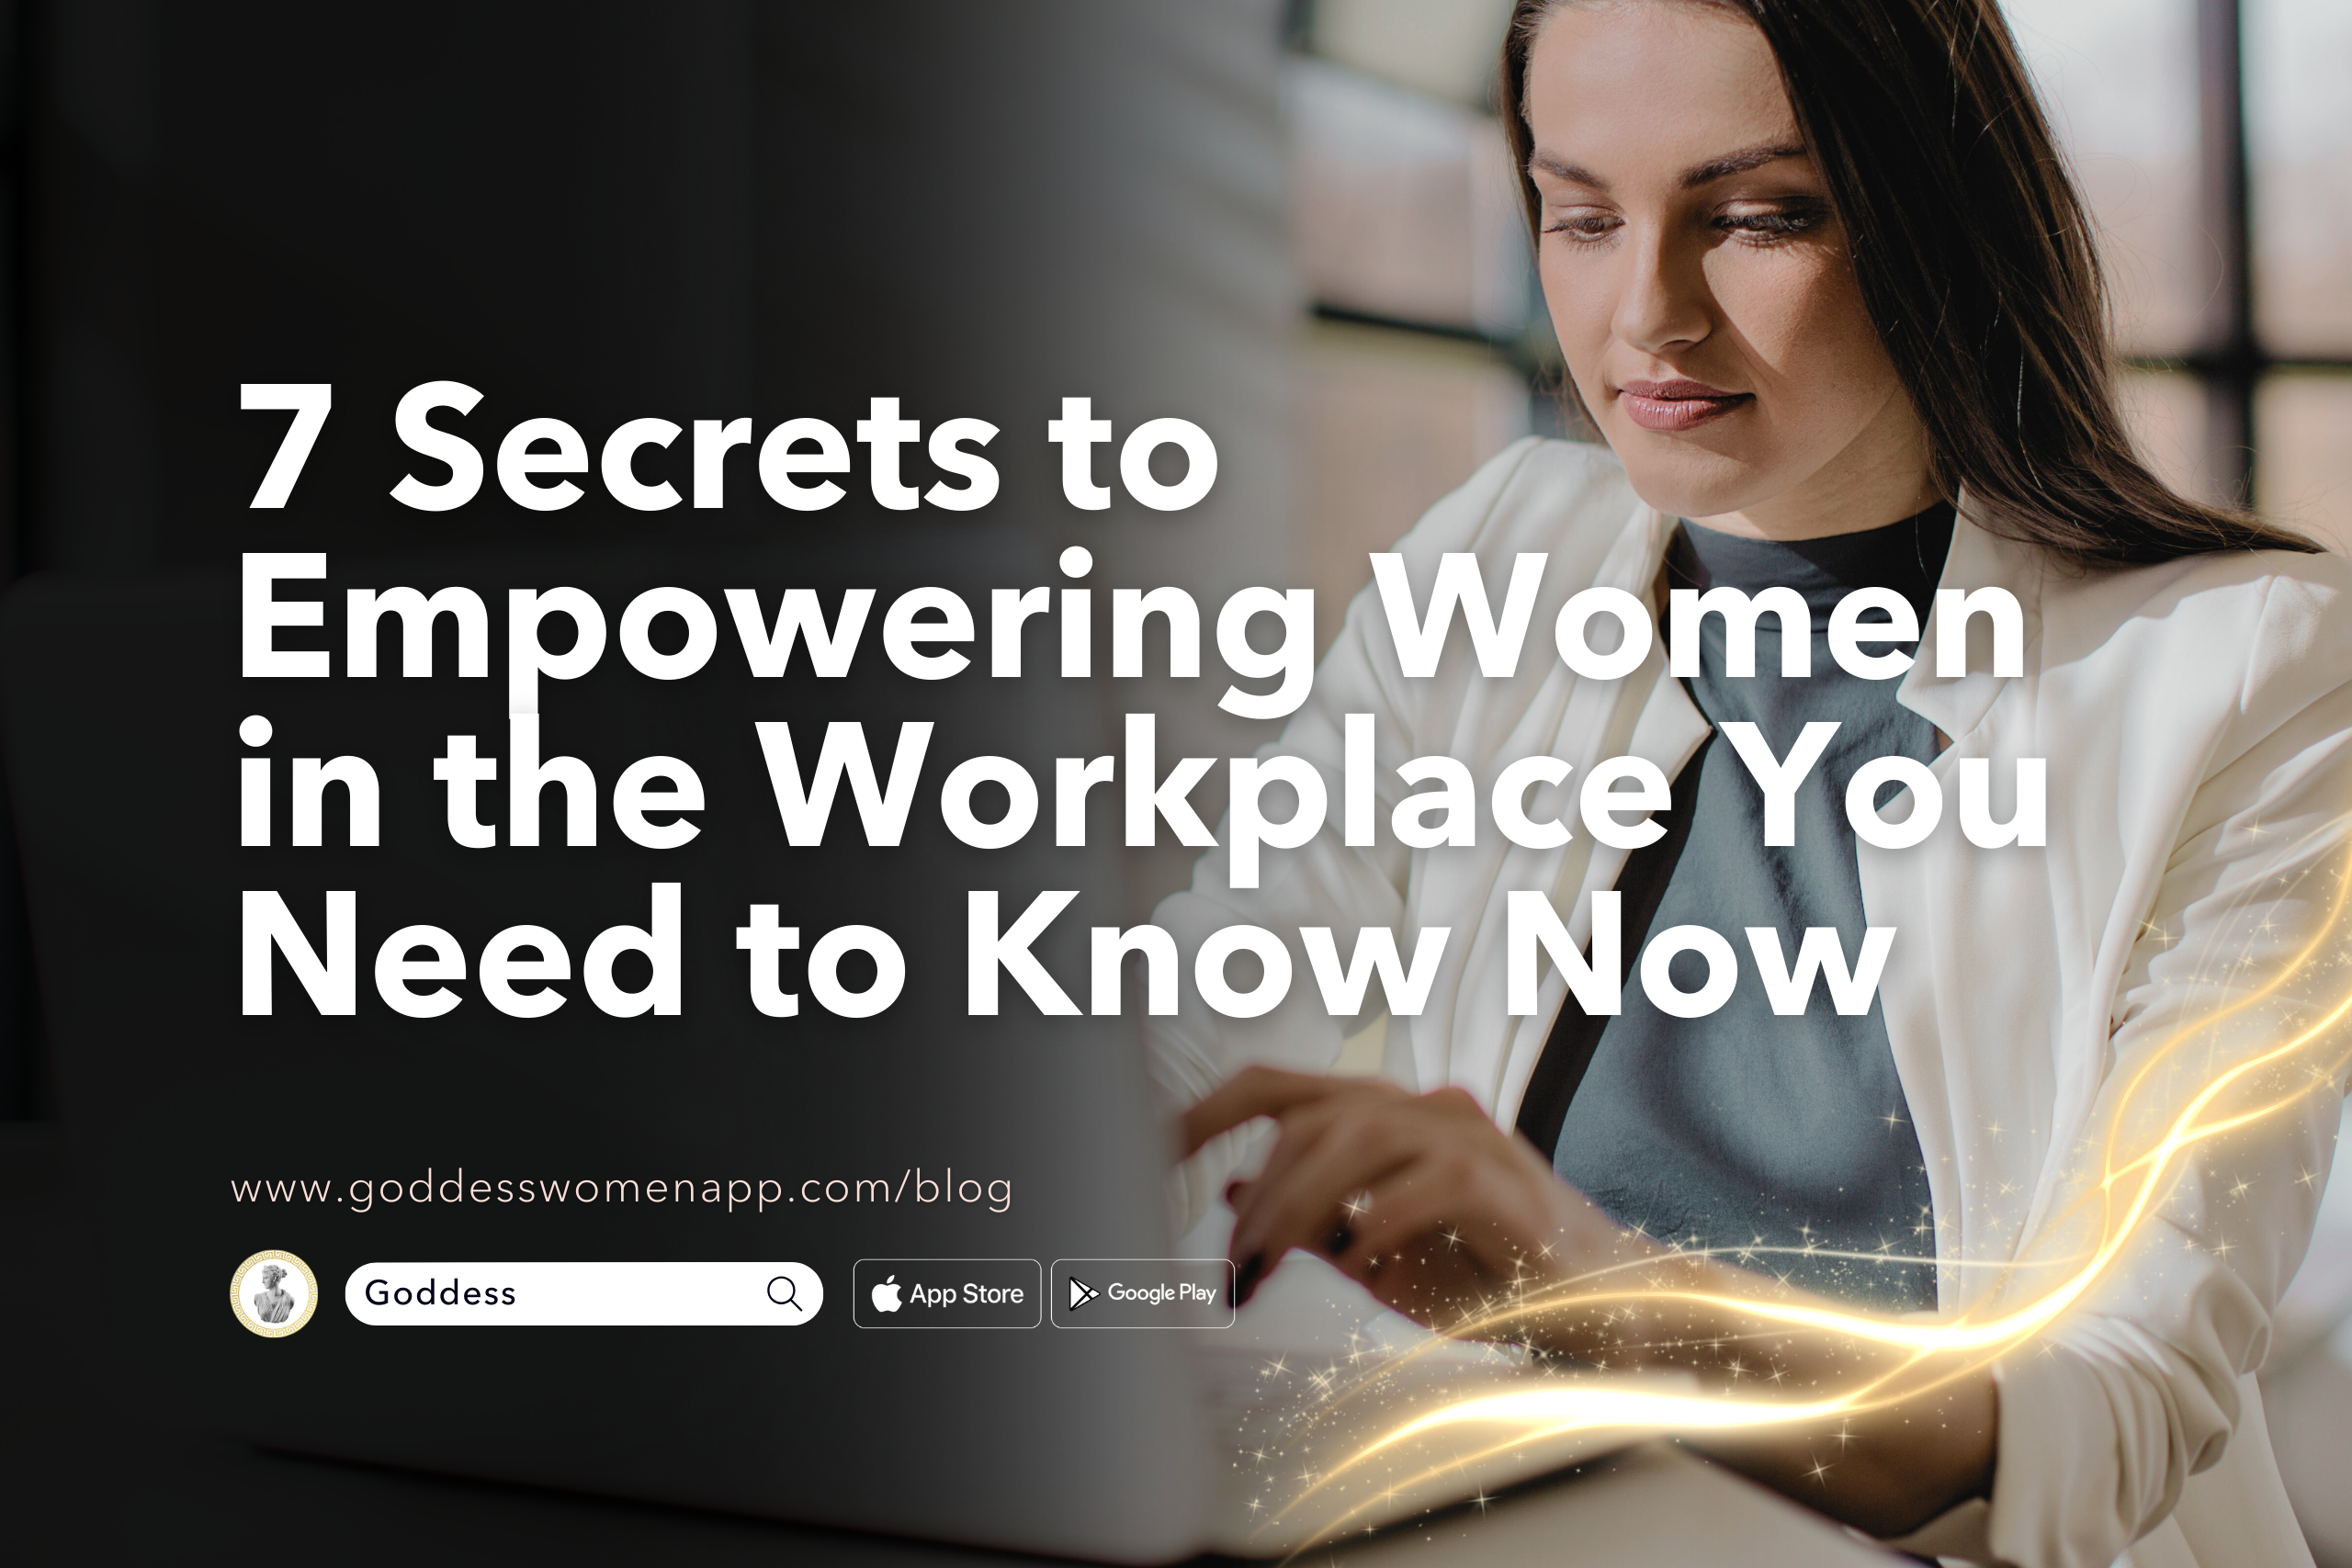 7 Amazing Secrets to Empowering Women in the Workplace You Need to Know Now